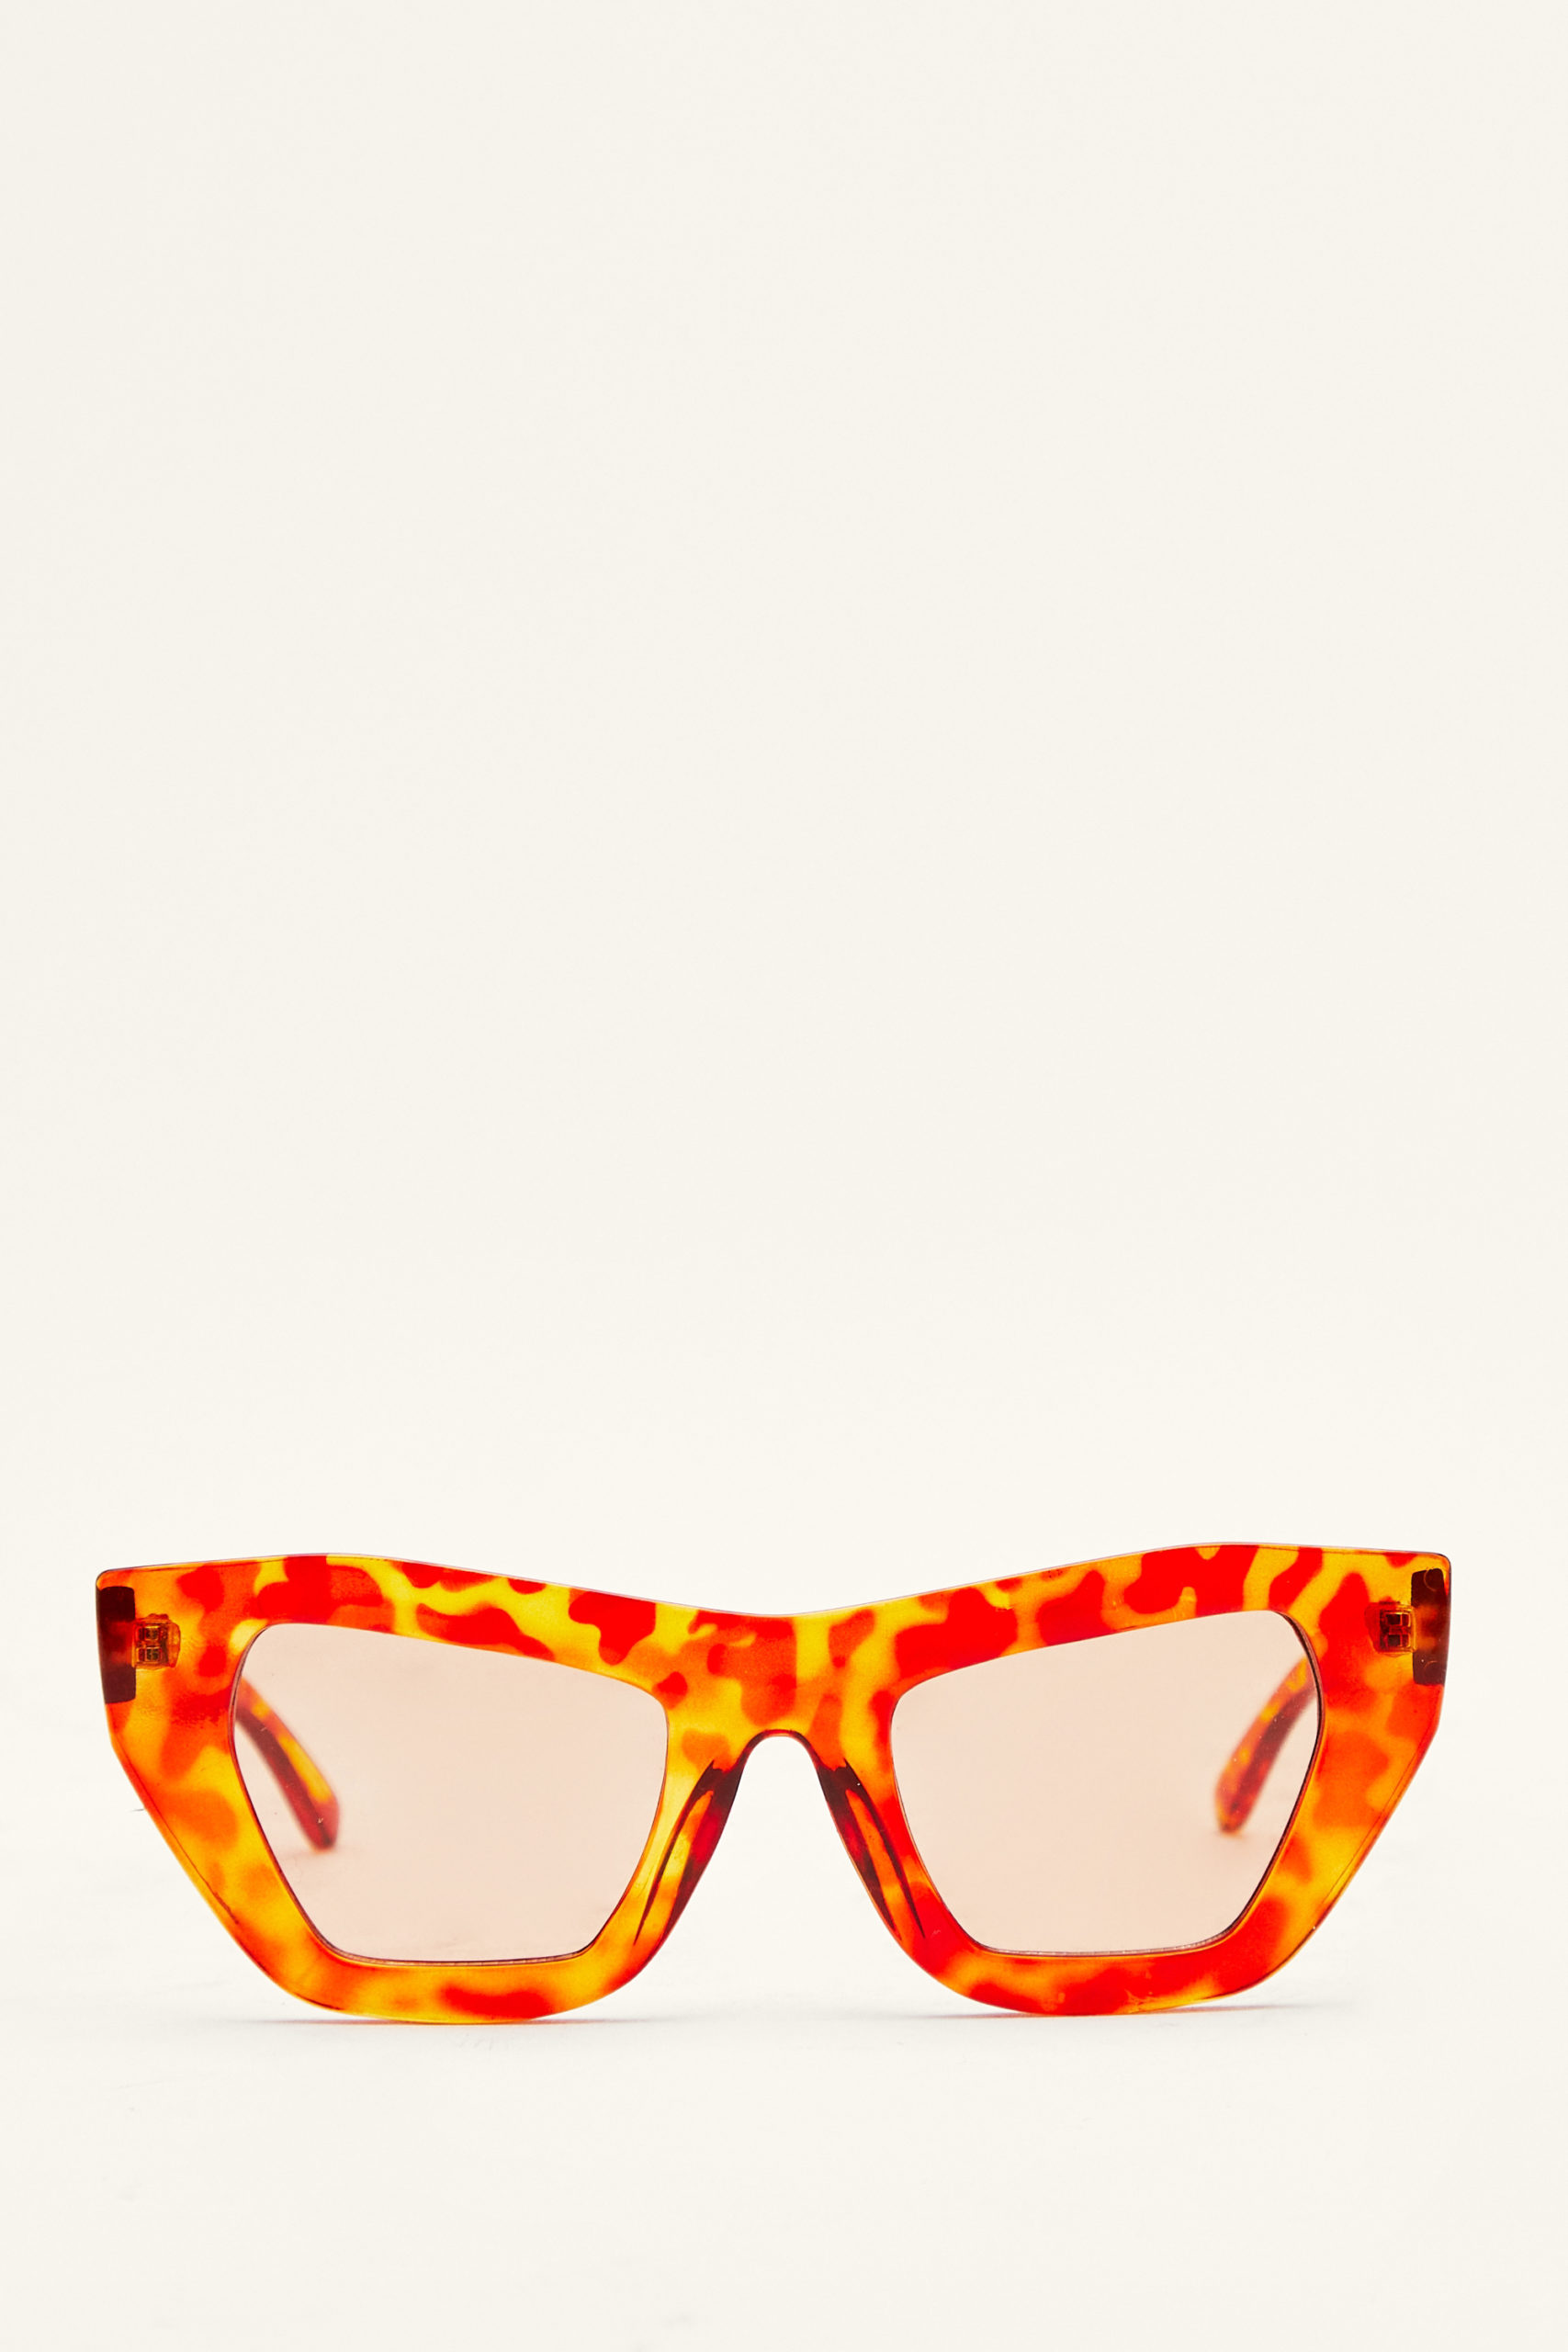 Shine Brightly with Trendy Sunglasses